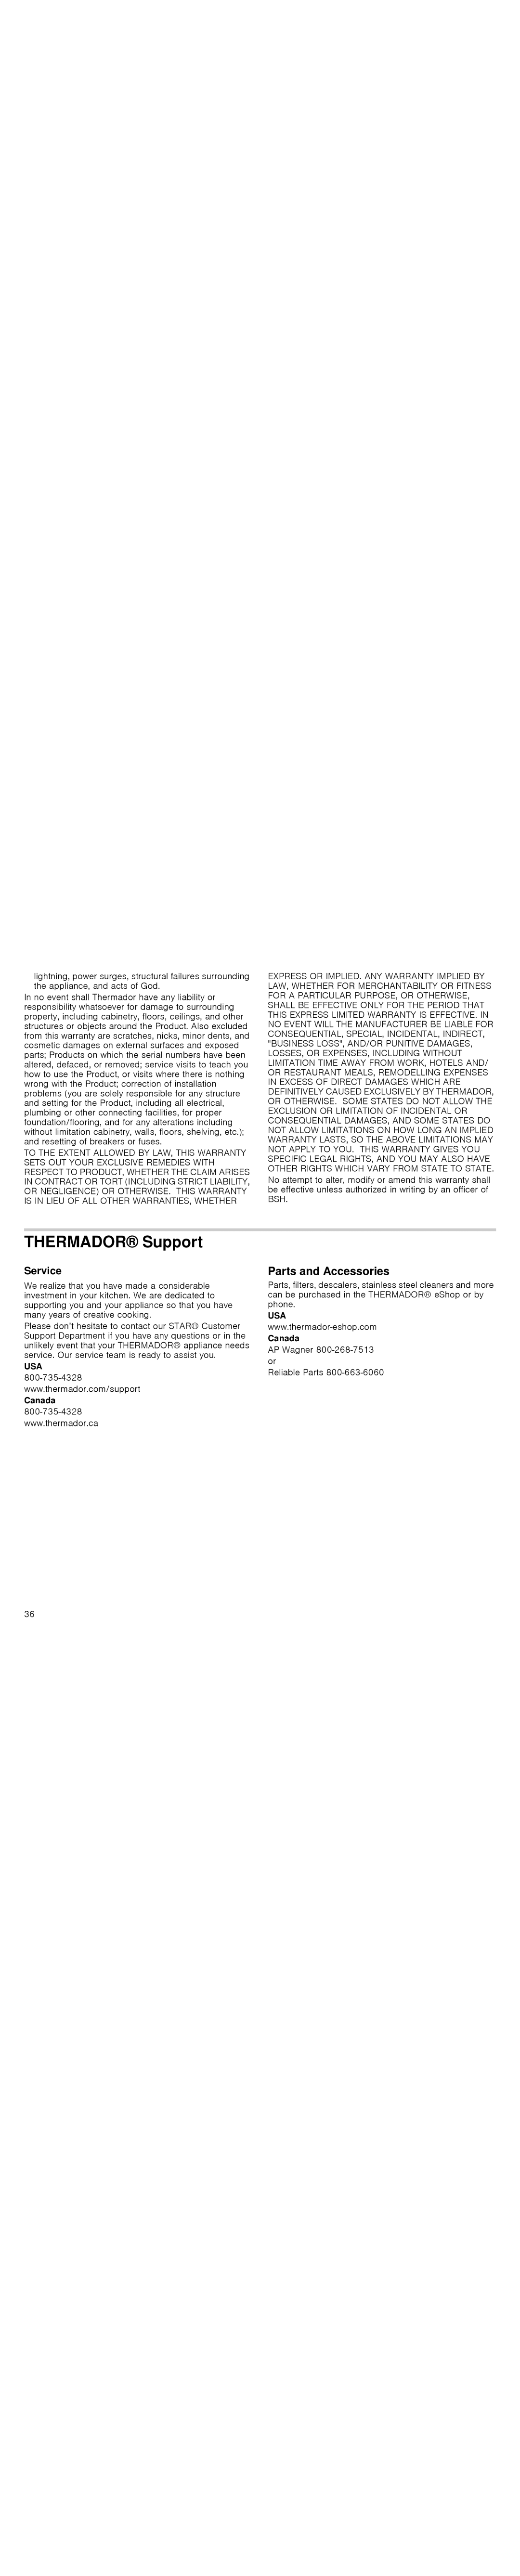 Thermador PODM301J, PODMW301J, POD301J, PODC302J manual THERMADOR Support, Parts and Accessories, Service, Canada 